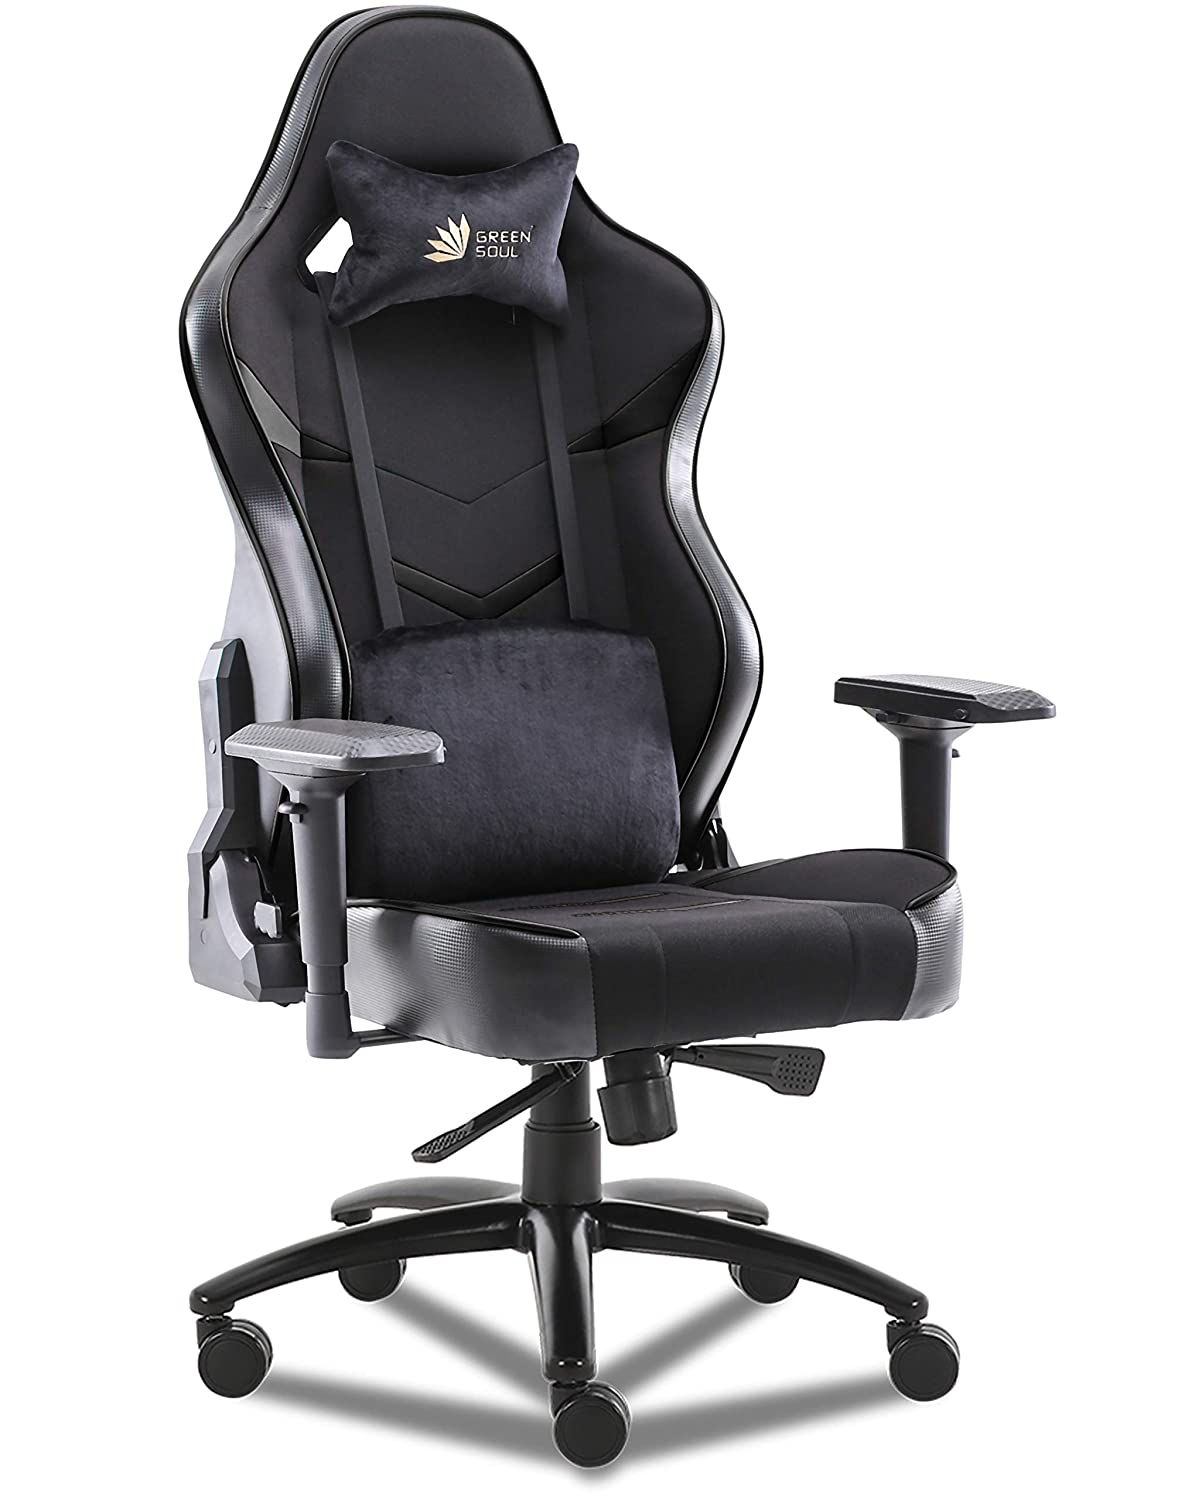 green soul gaming chair review by pubgpclite